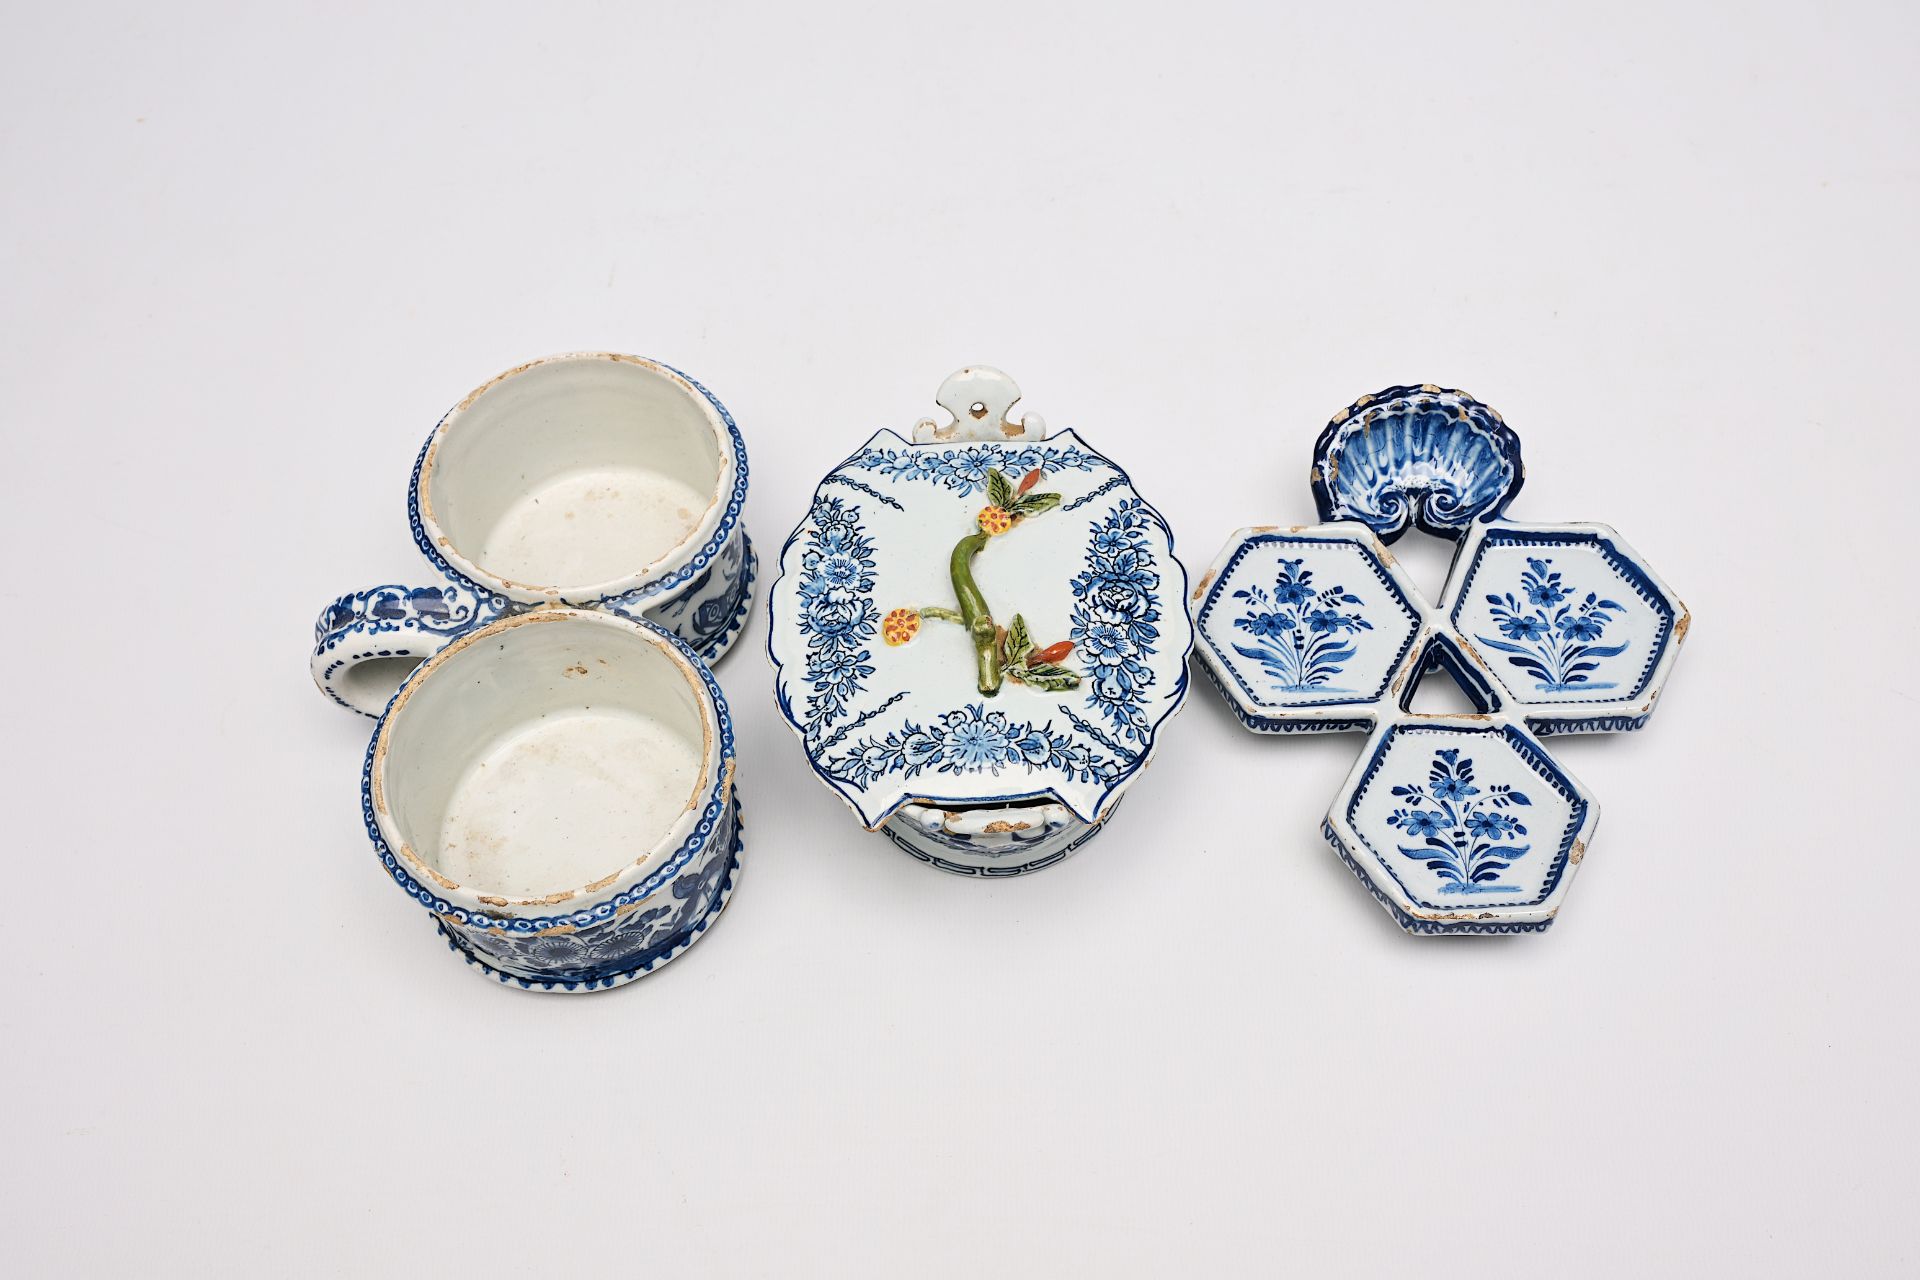 A Dutch Delft blue and white butter tub, an oil and vinegar holder and a spice dish with floral desi - Image 7 of 9